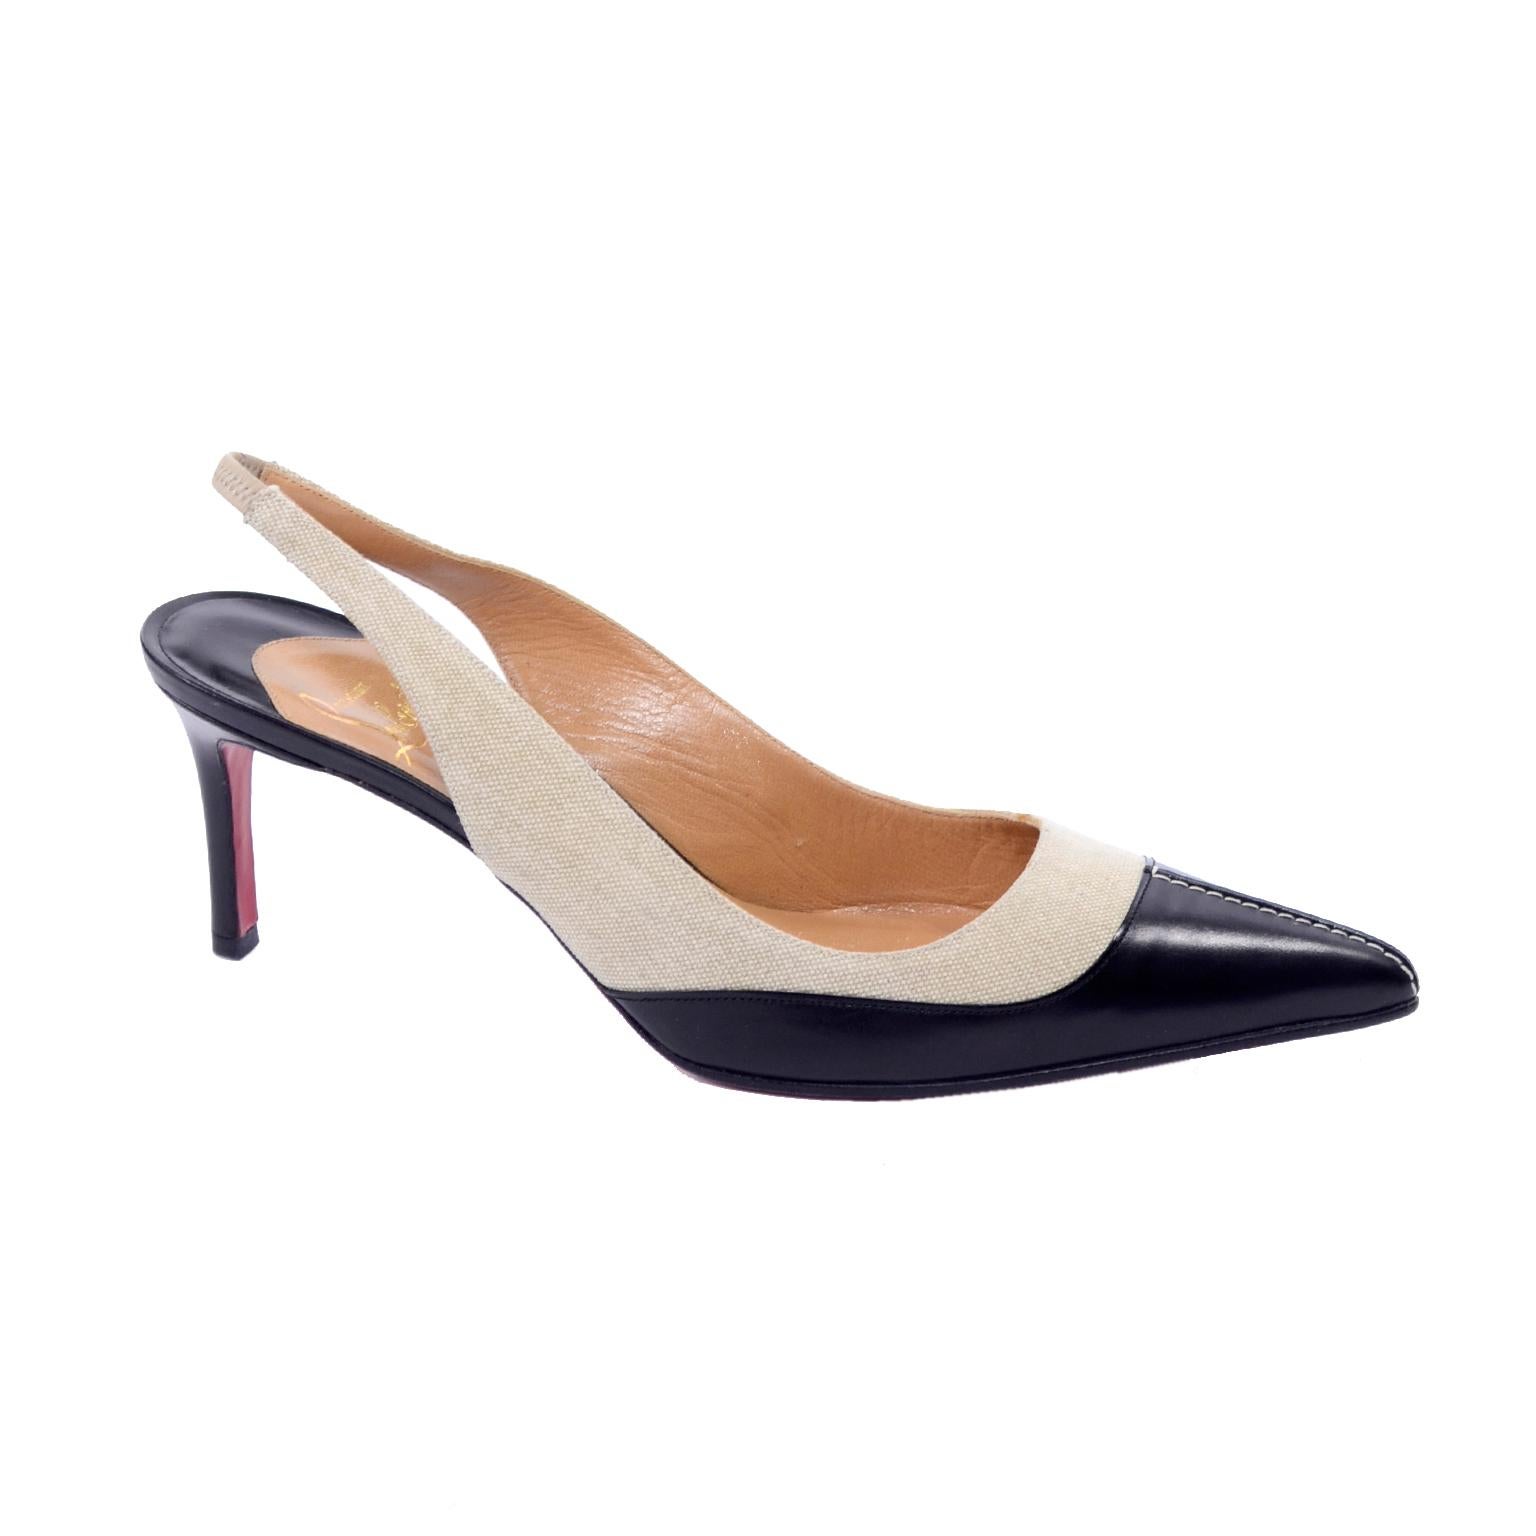 Christian Louboutin Shoes Slingback Heels in Two Tone Black & Natural Size 38.5 1